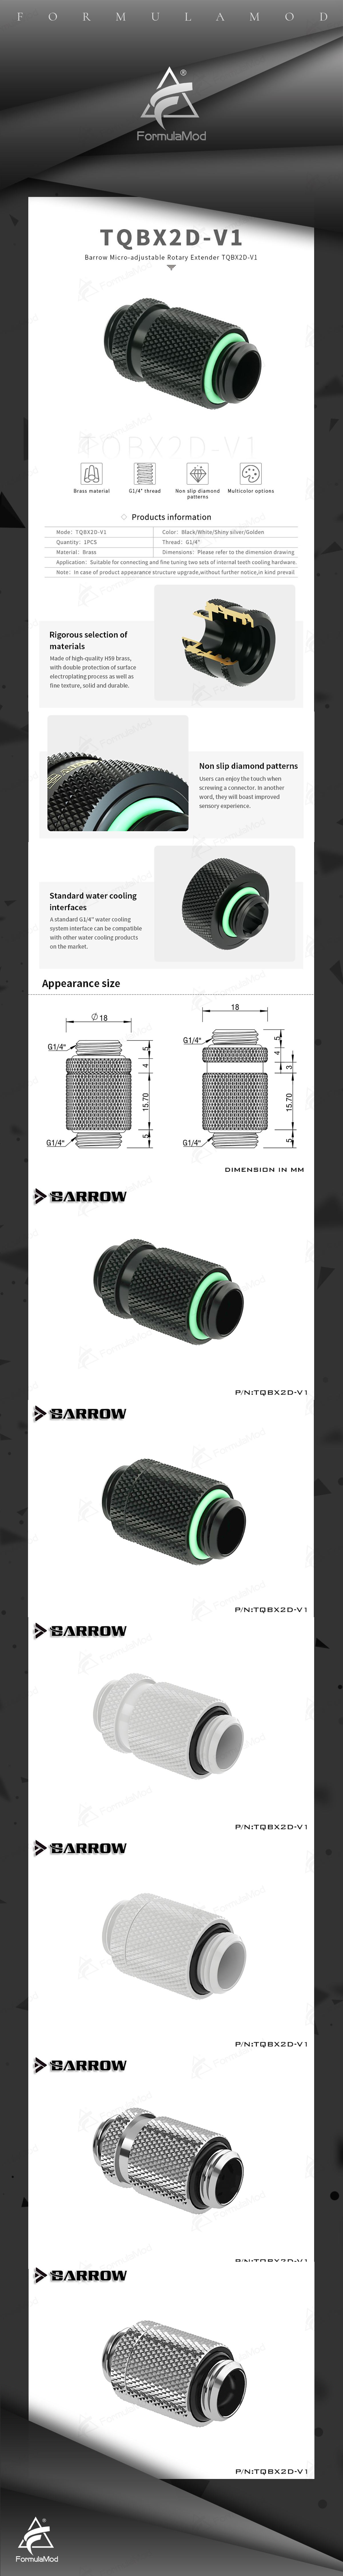 Barrow G1/4" Male To Male Rotary Connectors / Extender (20.2-23.2mm), PC Water Cooling System, TQBX2D-V1  